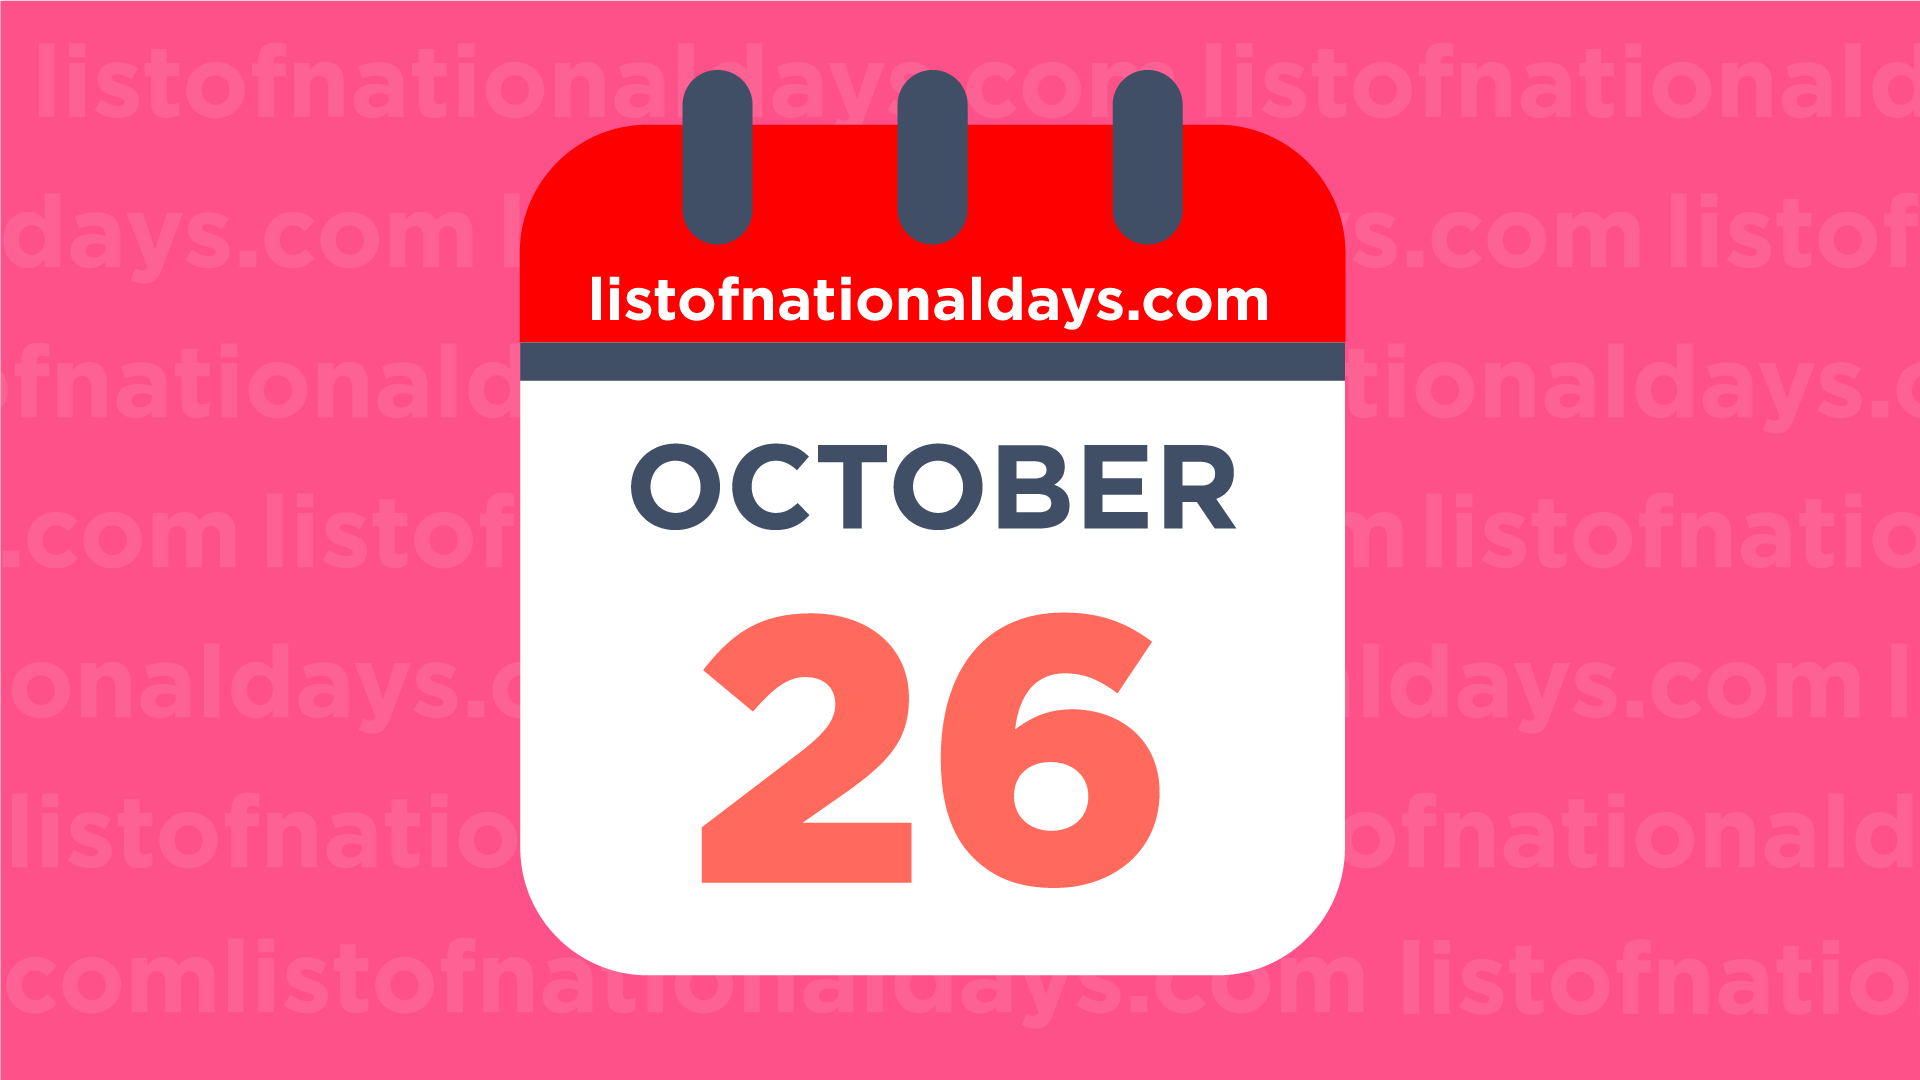 OCTOBER 26TH List Of National Days